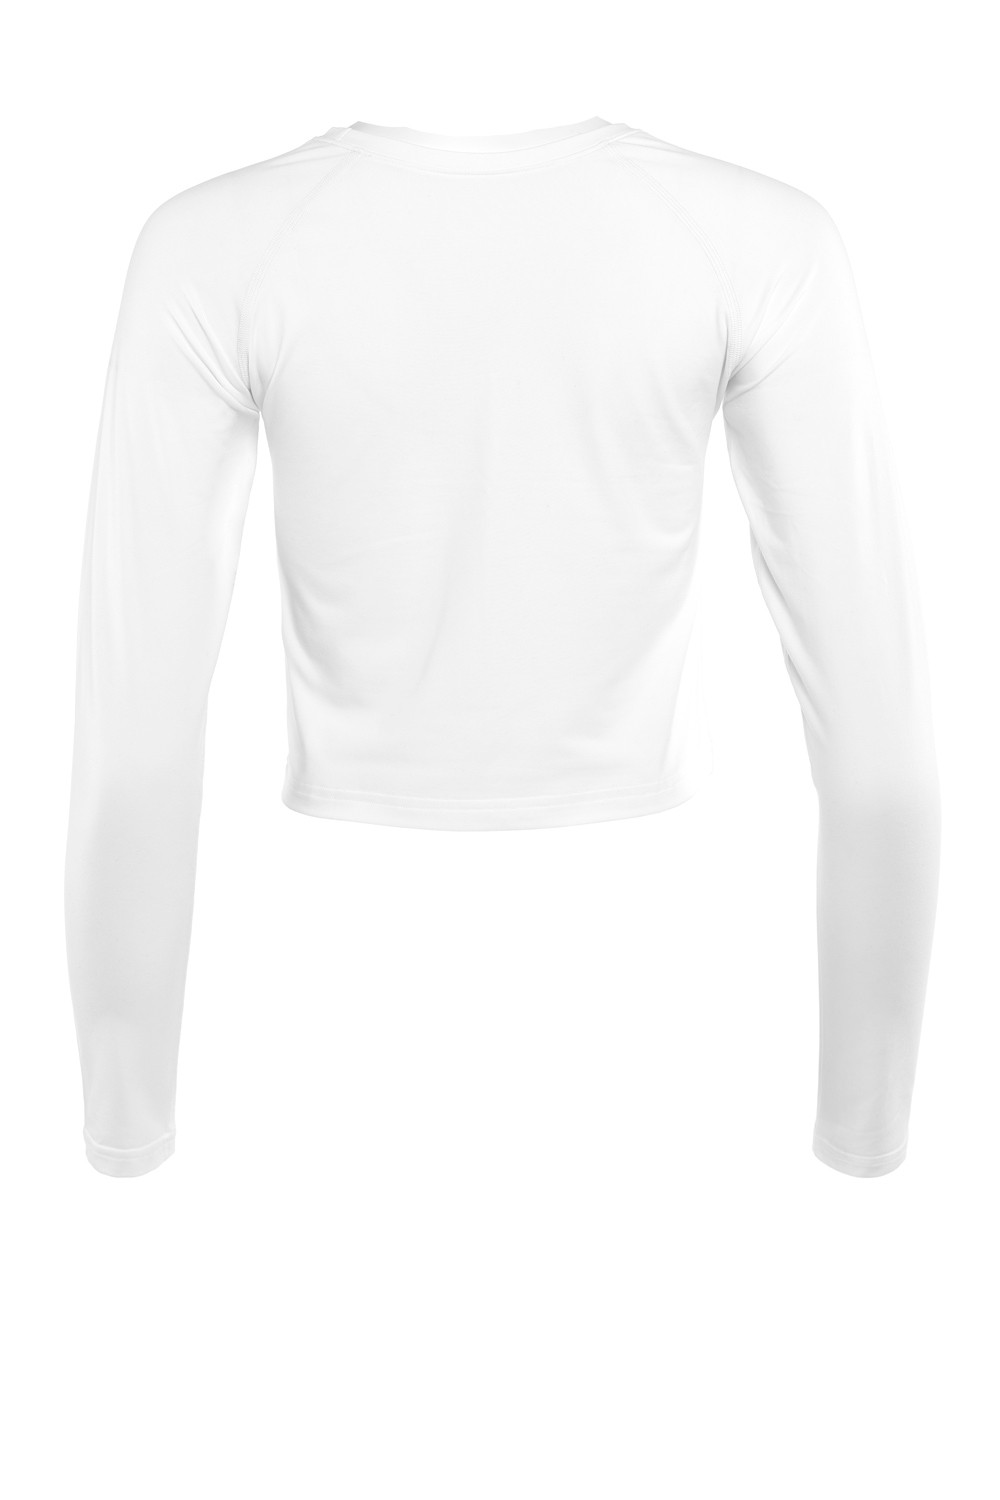 Functional Light and Soft Sleeve Long Top Ultra Style Soft Winshape AET116LS, ivory, Cropped